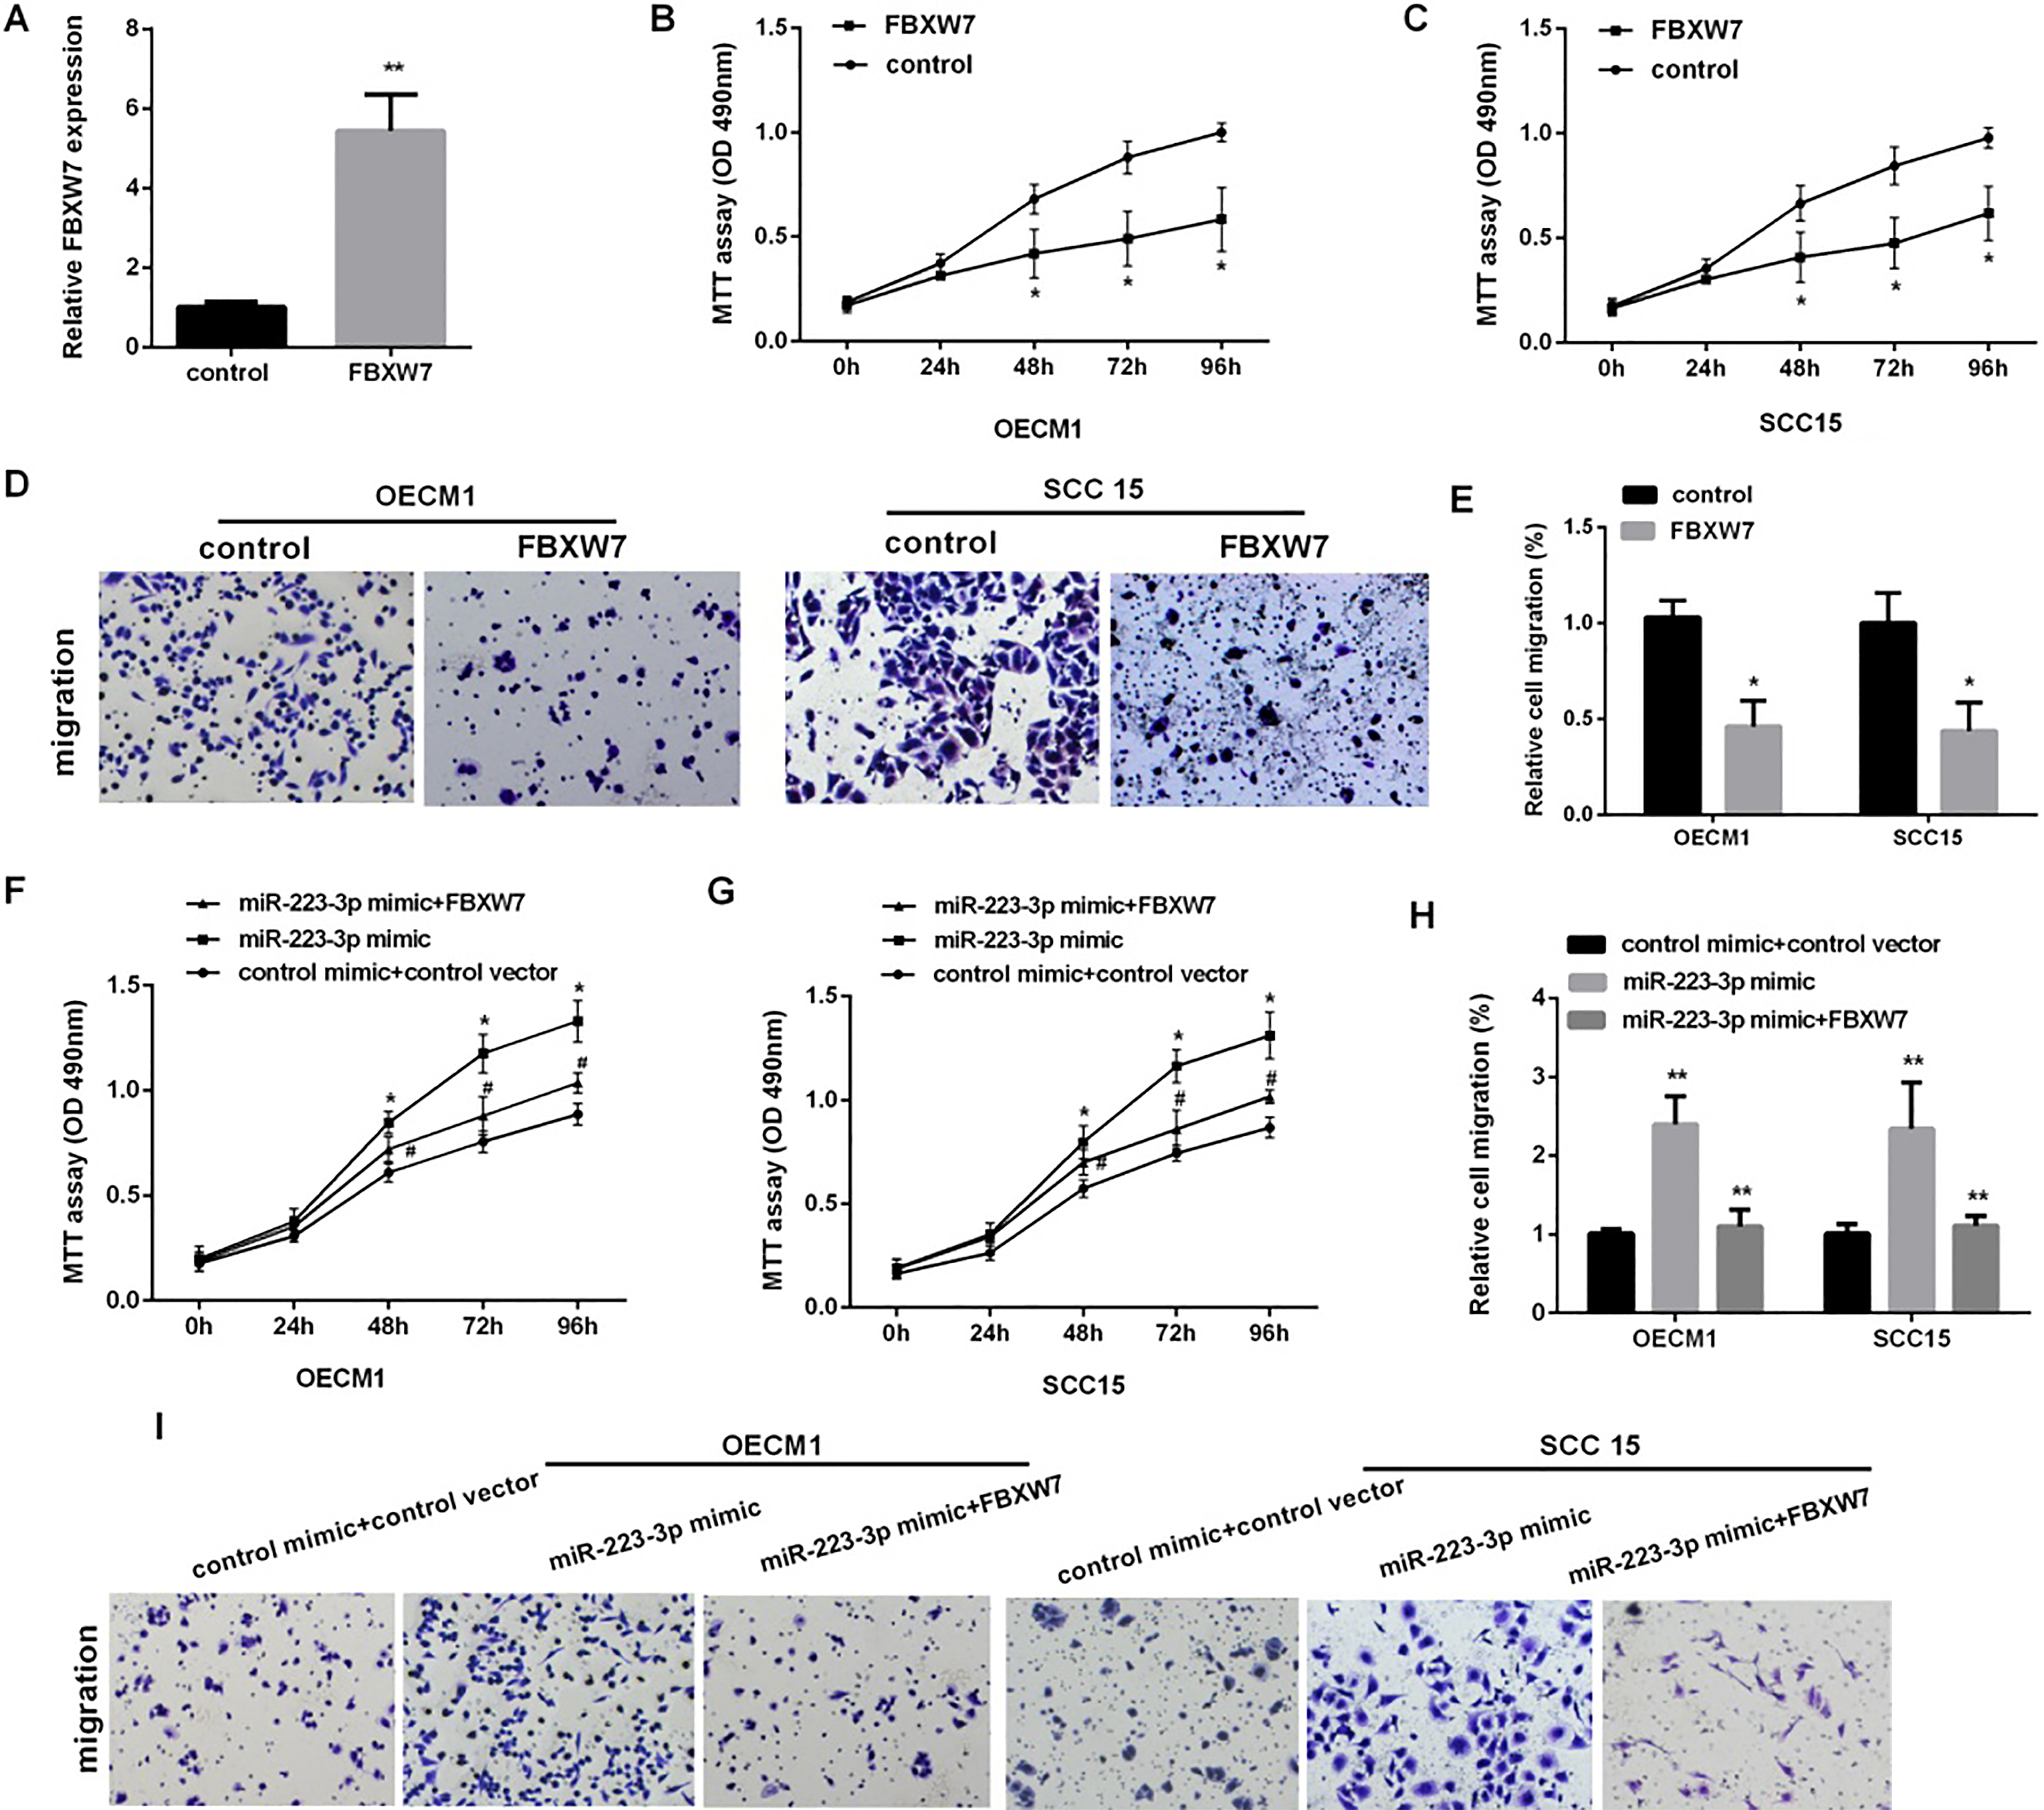 FBXW7 reversed miR-223-mediated OSCC cells proliferation and migration. (A) Detection of the relative FBXW7 mRNA expression in OECM1 cells after overexpression of FBXW7 for 48 h (P*< 0.05, P**< 0.01). (B and C) MTT assays was performed to detect the cells viabilities in OECM1 and SCC15 cell lines after re-expression of FBXW7 for 0, 24, 48, 72, 96 h (P*< 0.05). (D and E) Transwell assay detected the cell migration percents after overexpression of FBXW7 (P*< 0.05). (F and G) Detection of the cell viability in OCEM1 and SCC15 cell lines by MTT assay after transfected with miR-223 mimic or both miR-223 mimic and FBXW7 vector (P*< 0.05, P#< 0.05). (H and I) Transwell migration assay detected the relative cell migration percent in OCEM1 and SCC15 cell lines after transfected with miR-223 or both miR-223 mimic and FBXW7 vector (P**< 0.01). These experiments were repeated three times.